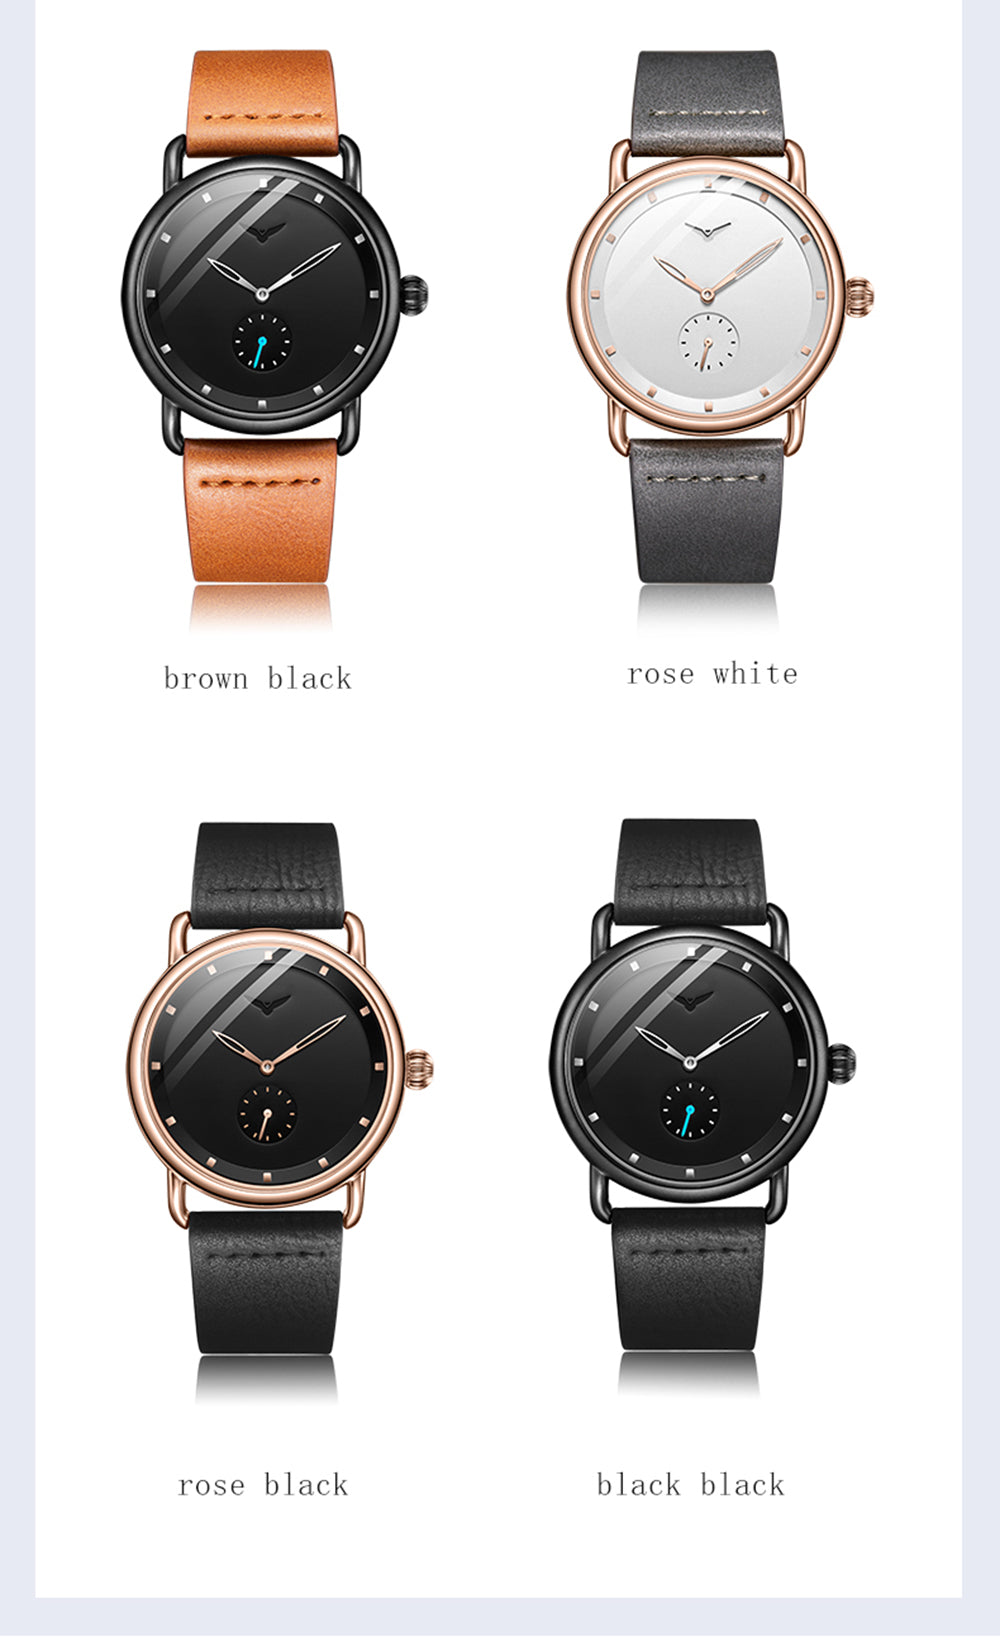 Top Brand Men's Casual Watches With Leather Strap.